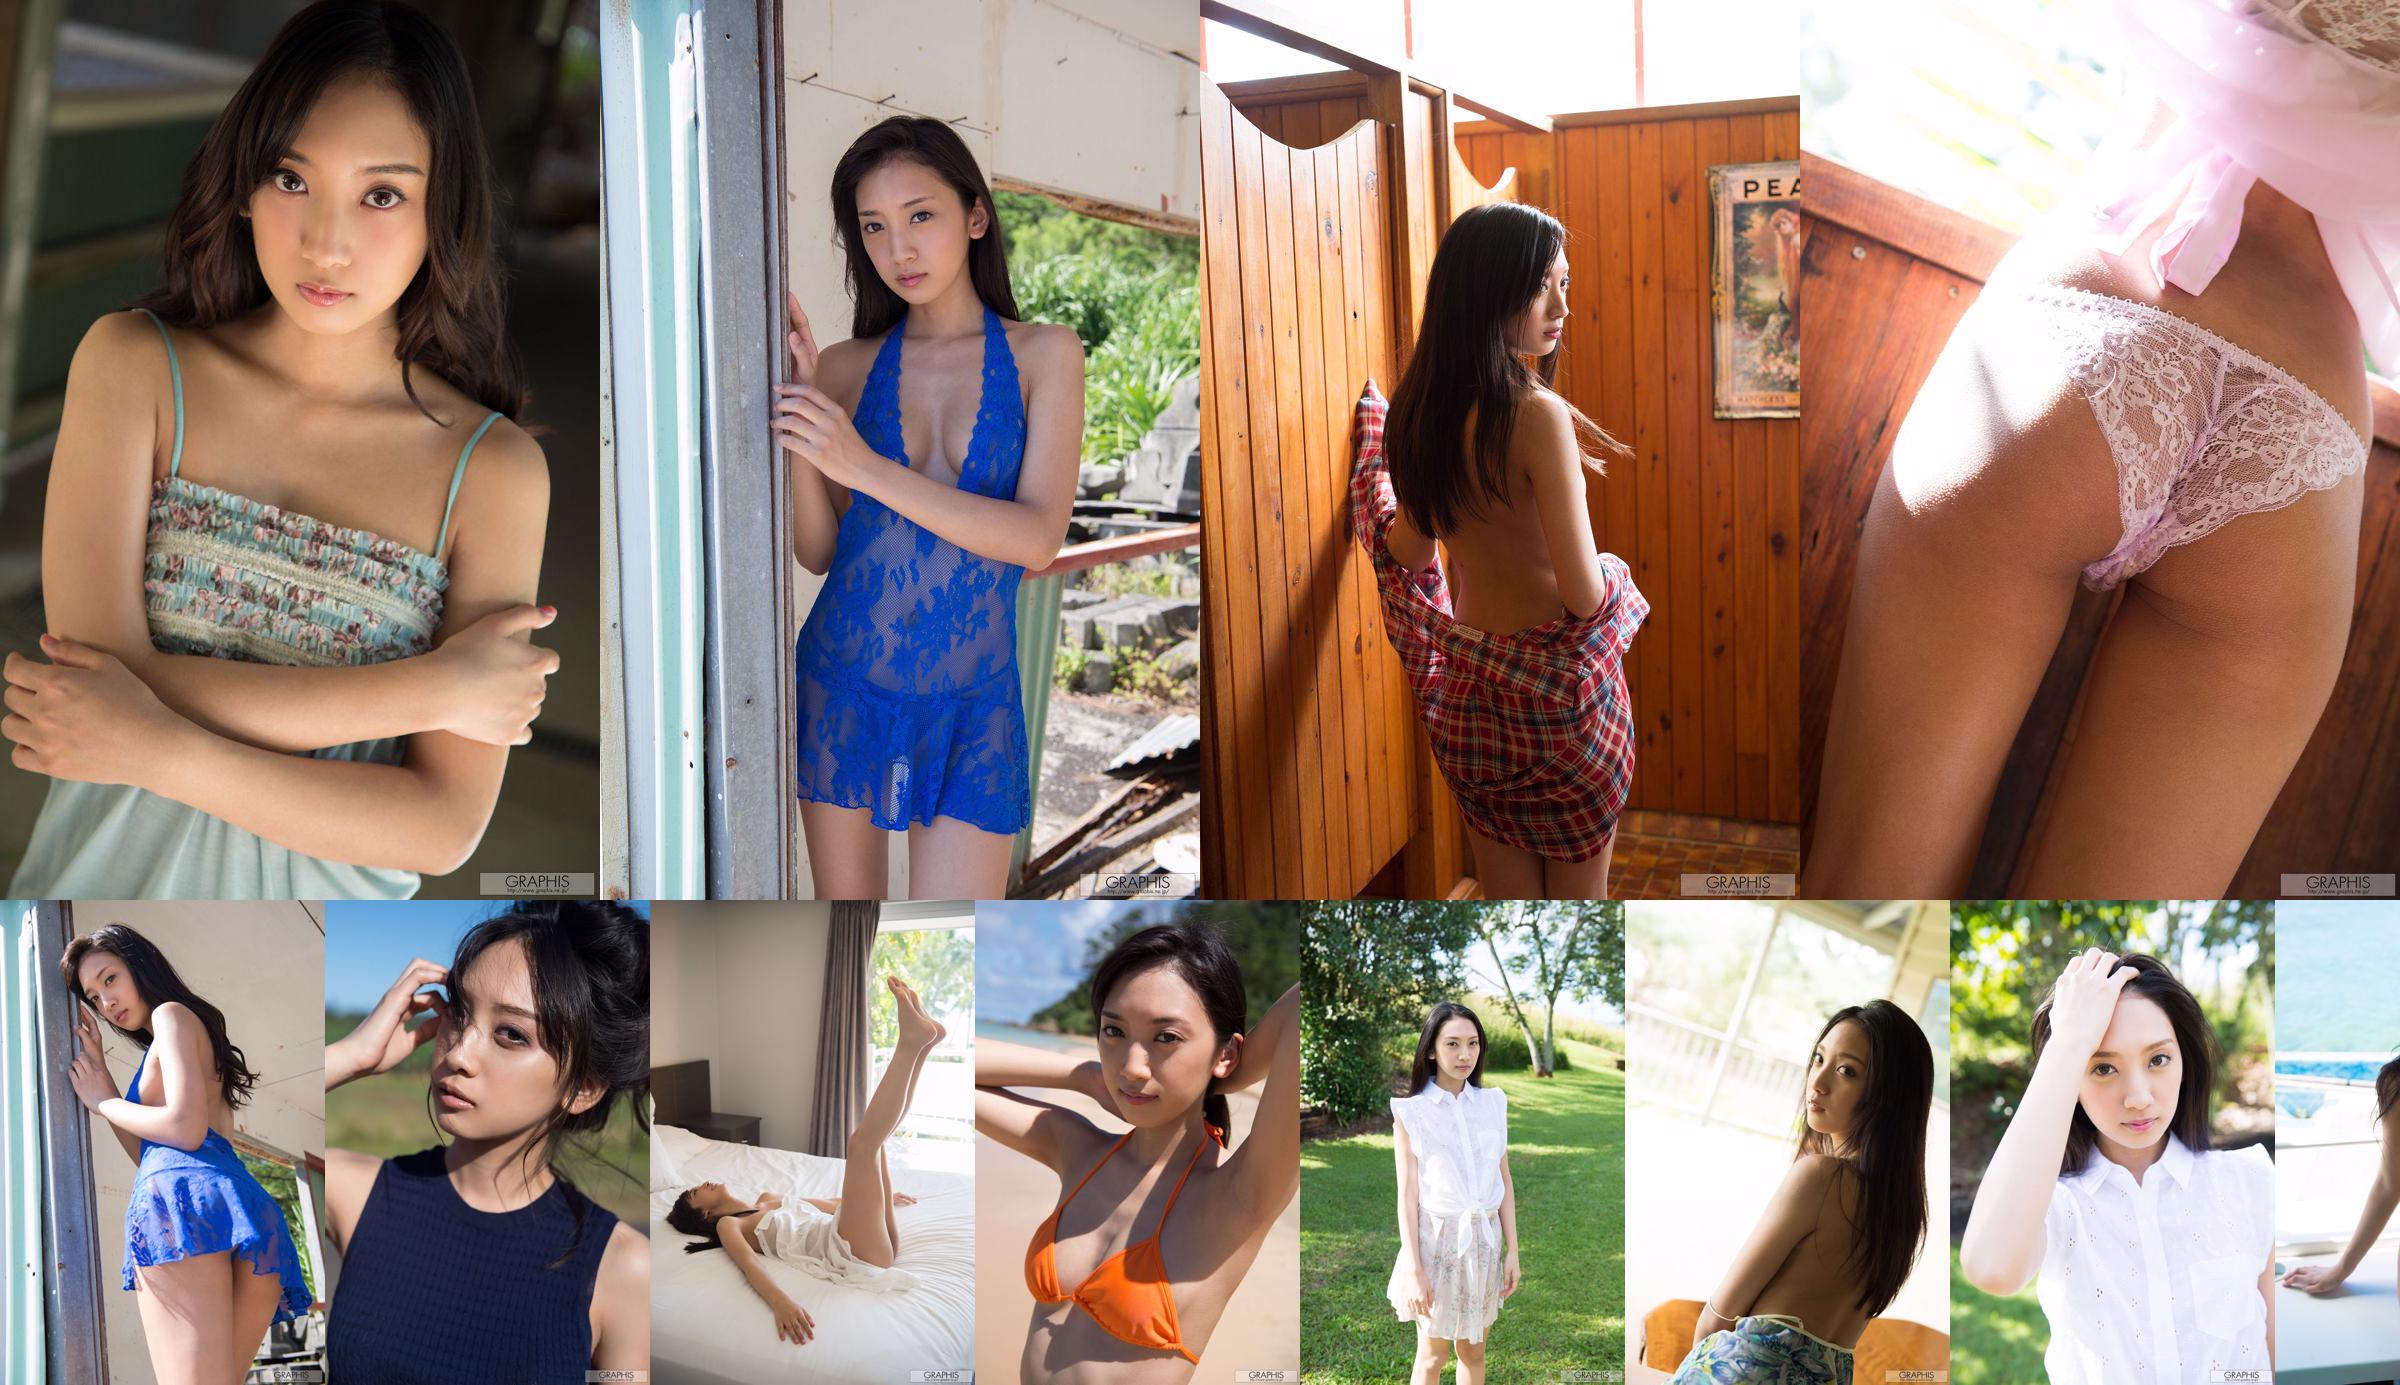 Tsujimoto An "Asian Beauty" [Graphis] AUTUMN SPECIAL No.5732ac หน้า 1